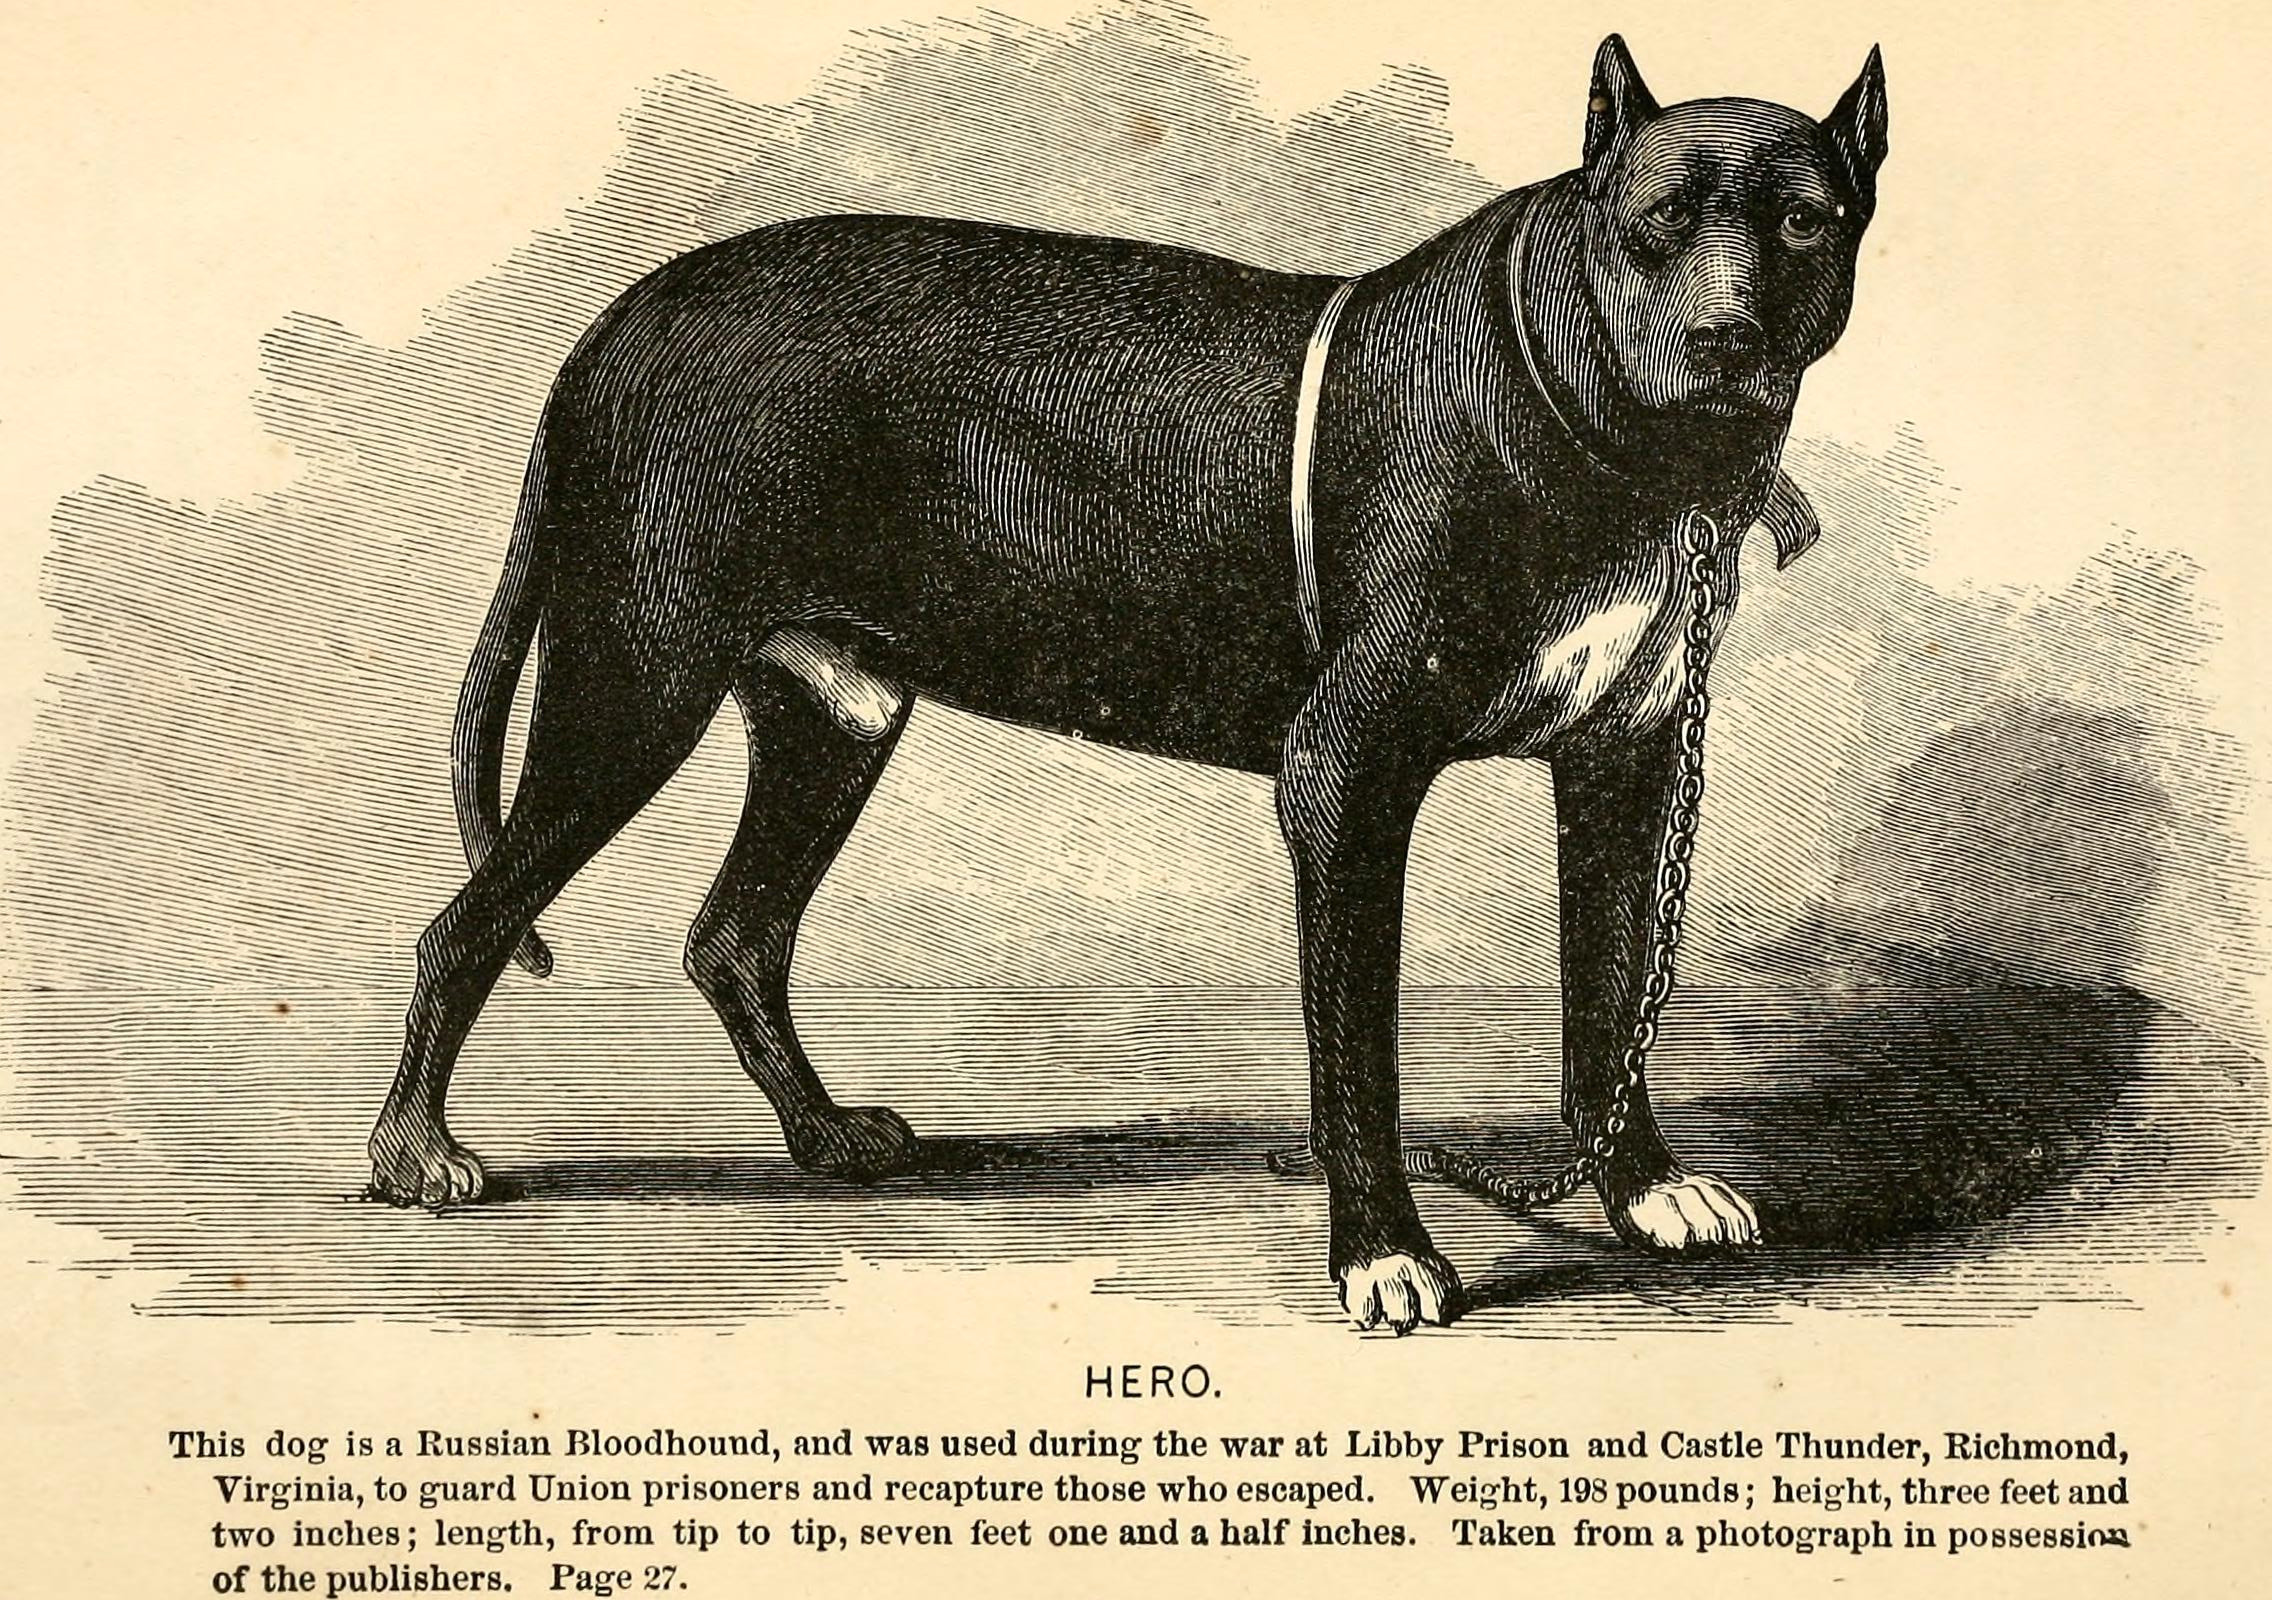 Drawing Guard Dog File the soldier S Story Of His Captivity at andersonville Belle